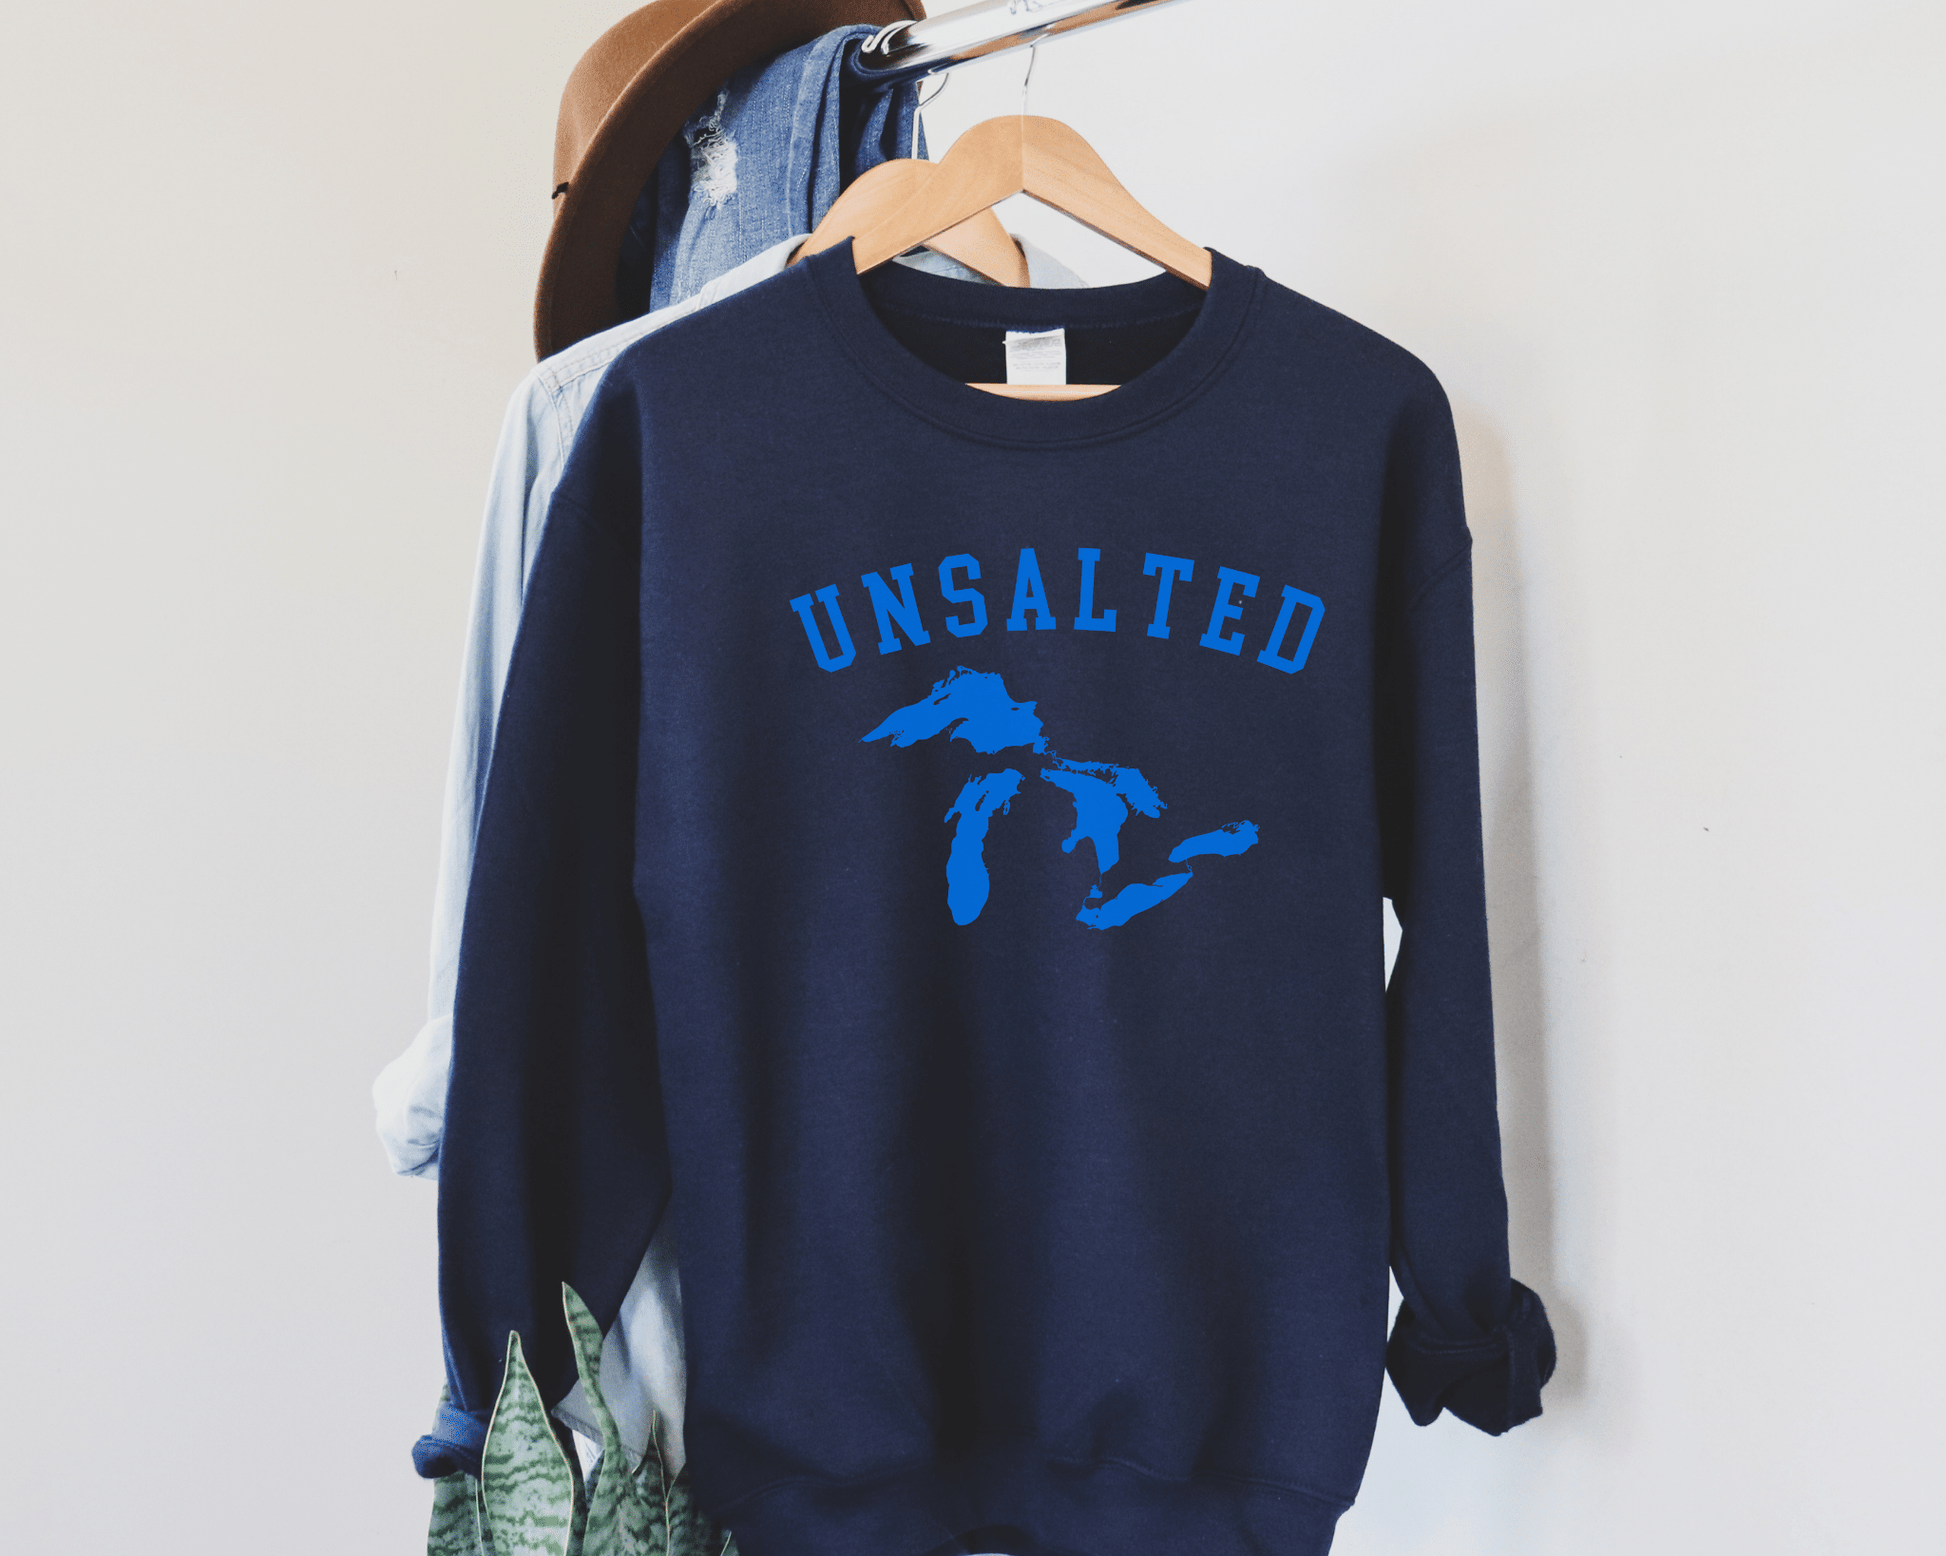 Unsalted Great Lakes Sweatshirt in Navy, hanging.